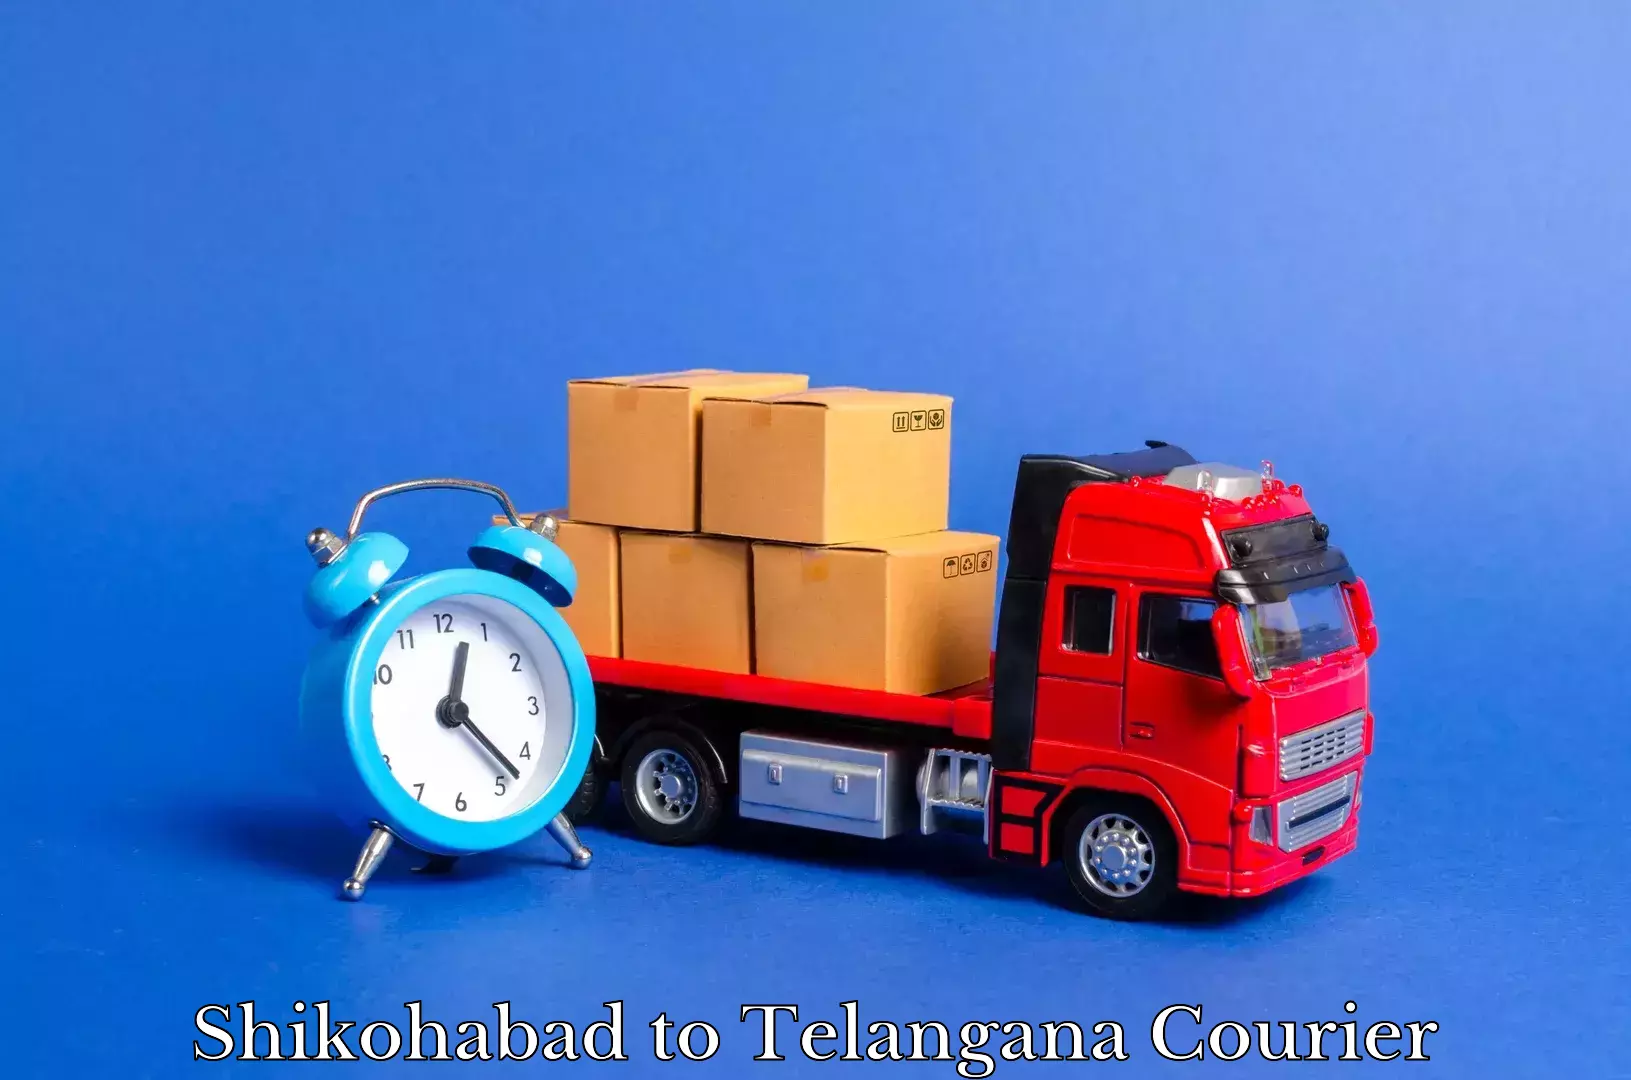 Home relocation experts in Shikohabad to Kodad